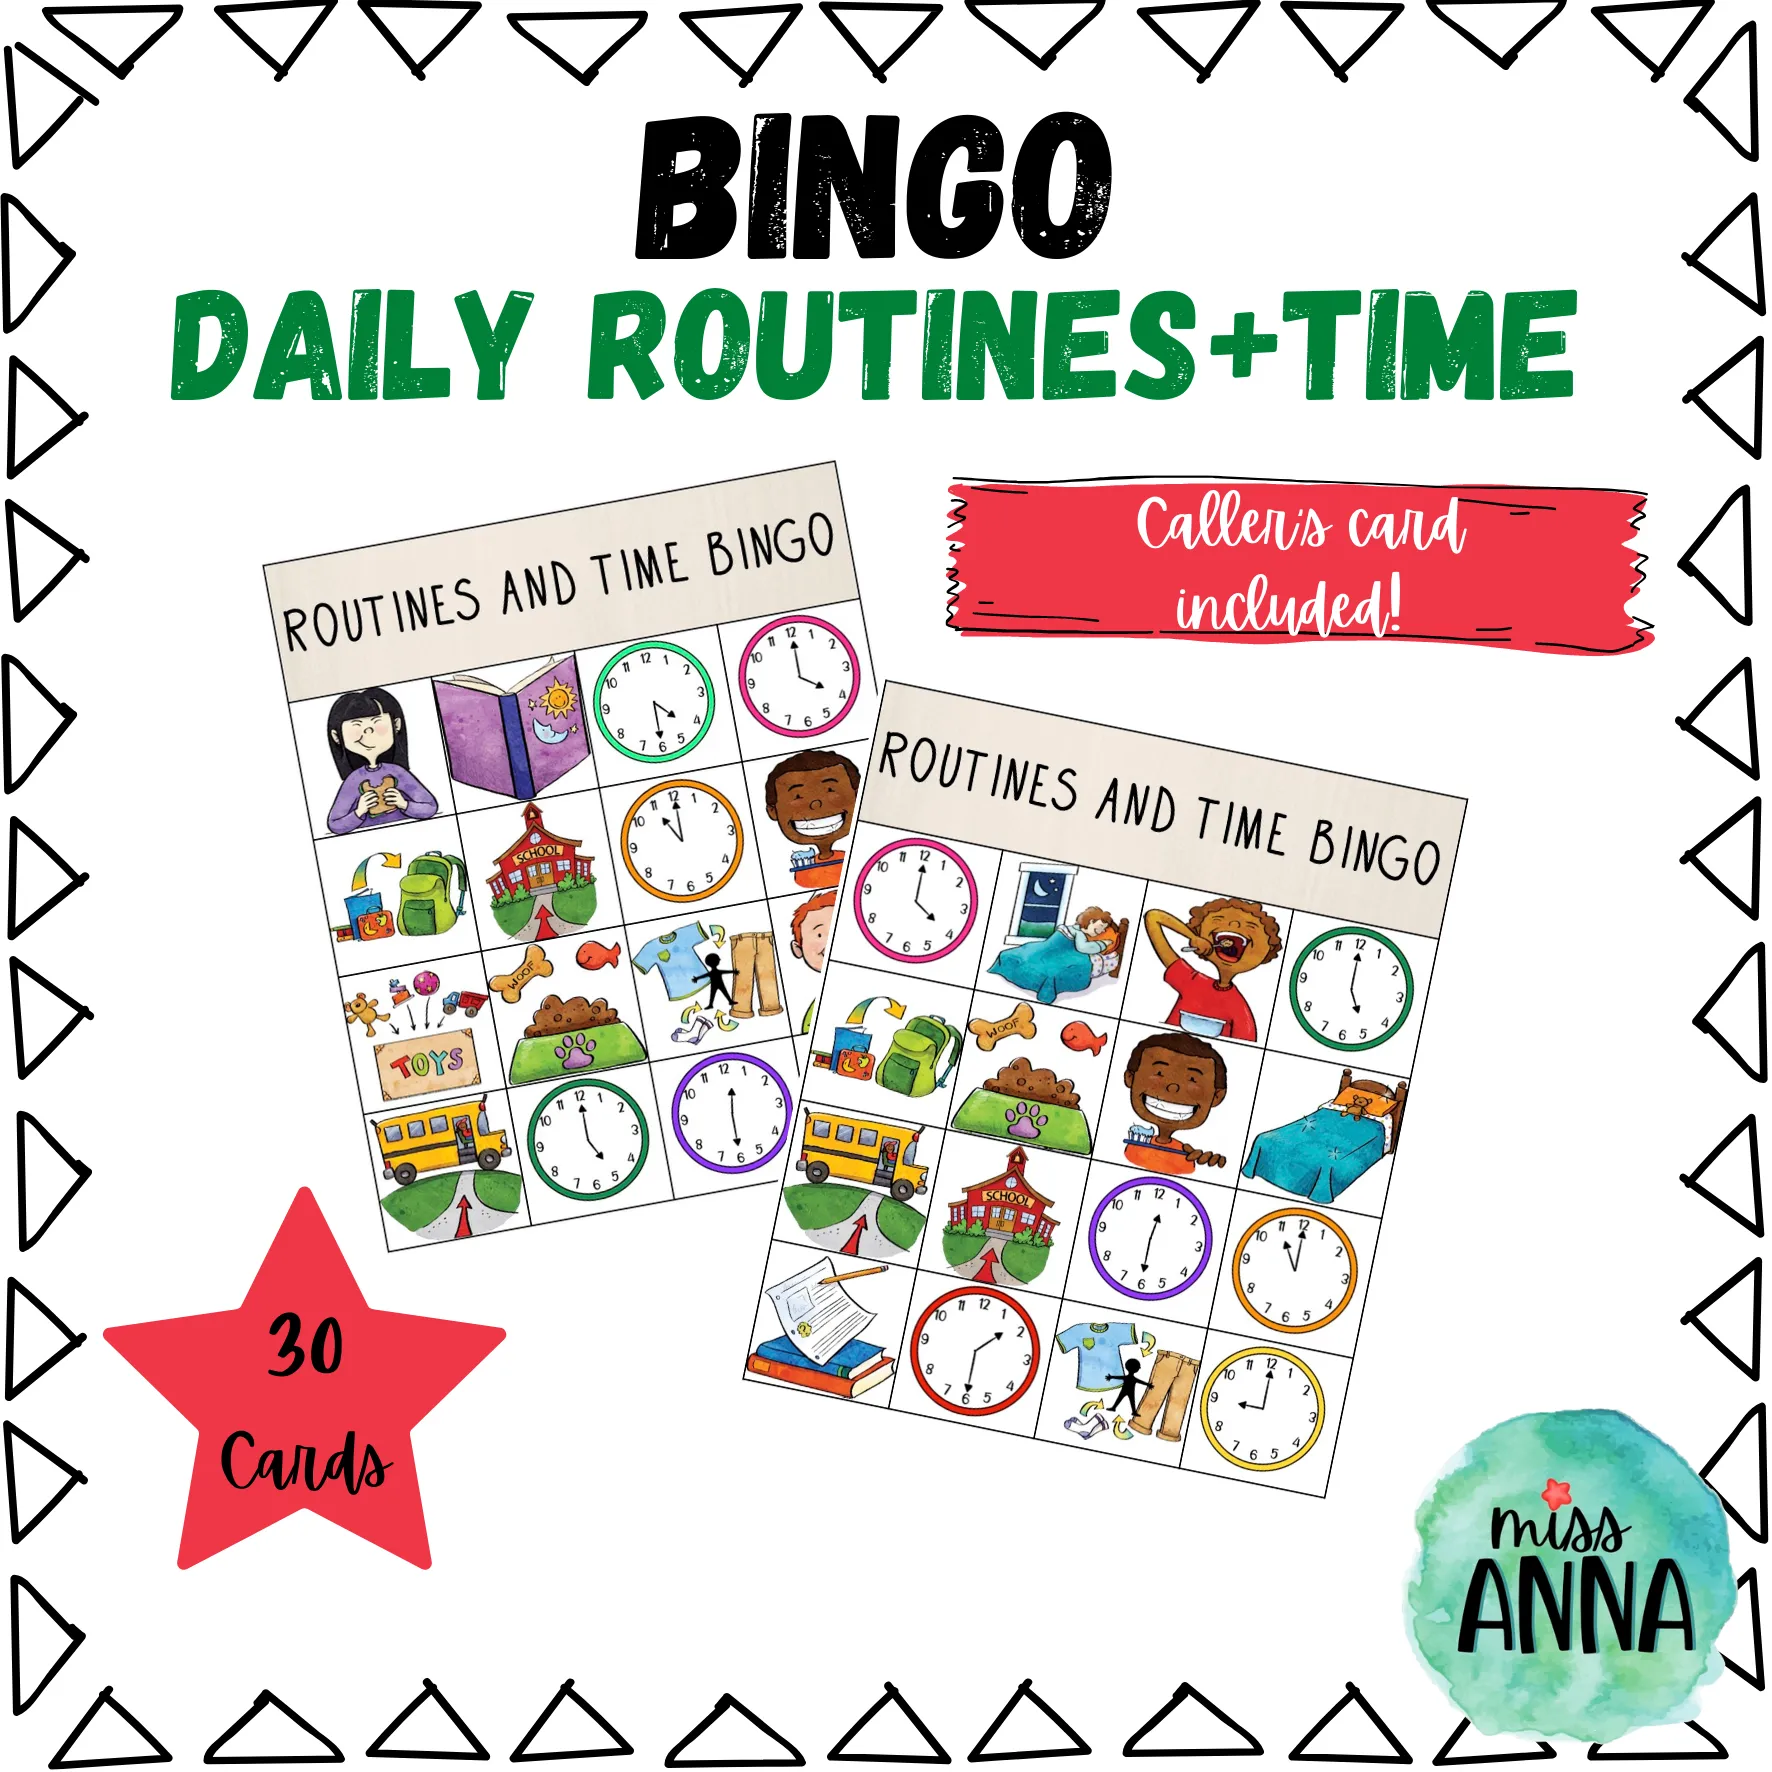 DAILY ROUTINES AND TIME Bingo